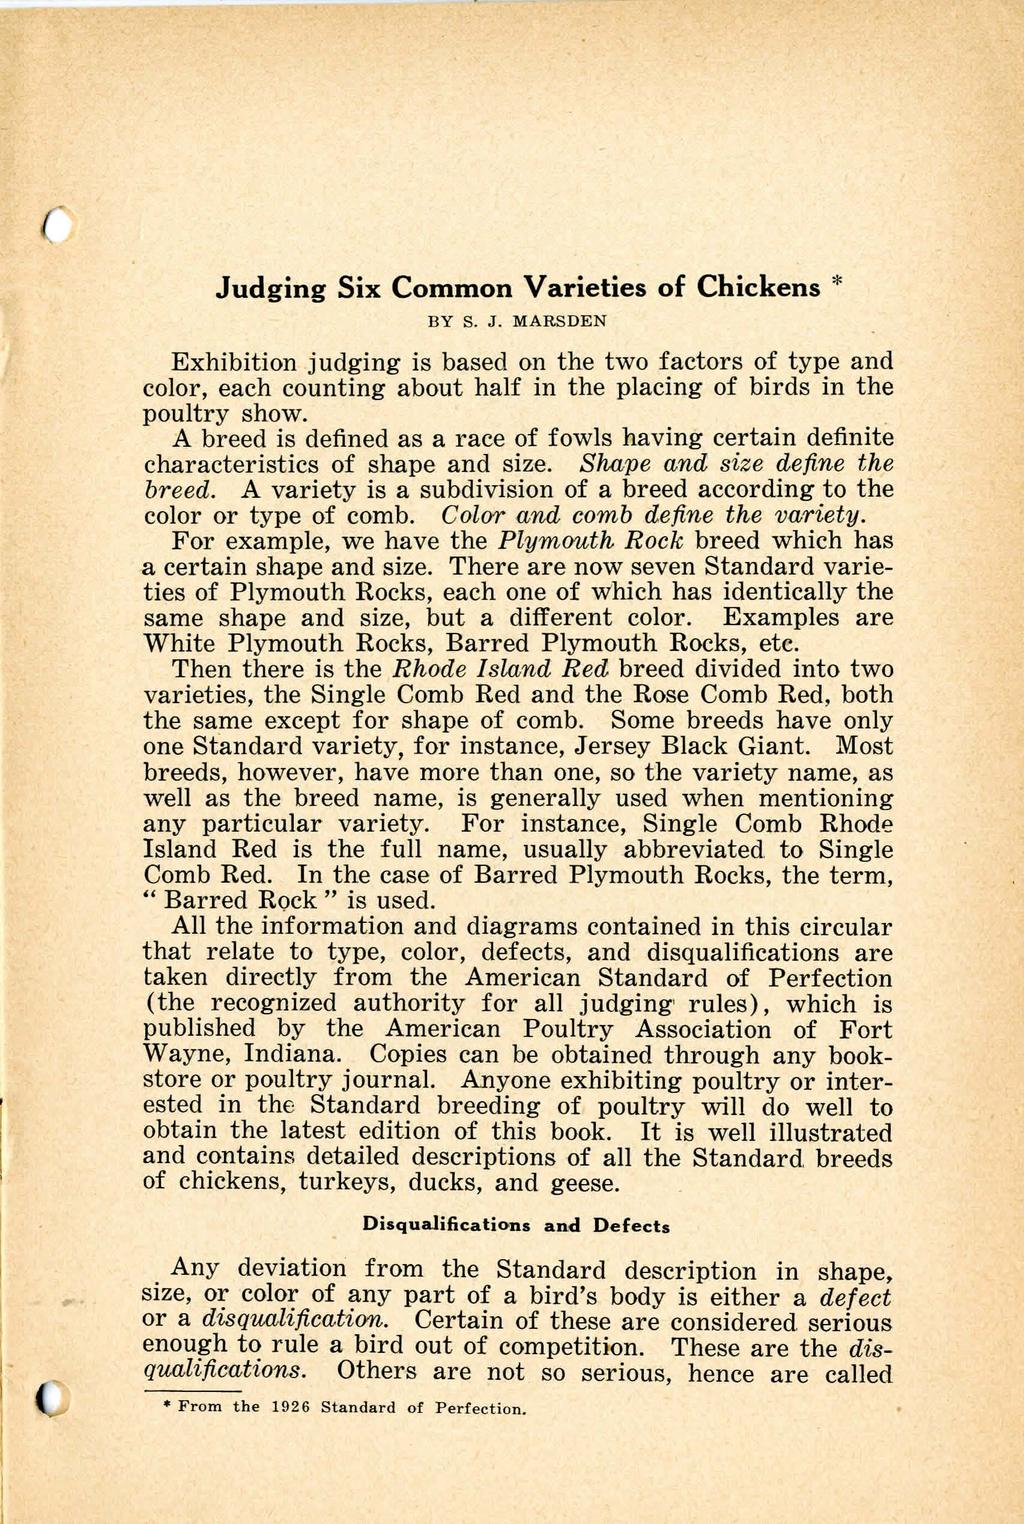 Judging Six Common Varieties of Chickens* BY S. J. MARSDEN Exhibition judging is based on the two factors of type and color, each counting about half in the placing of birds in the poultry show.